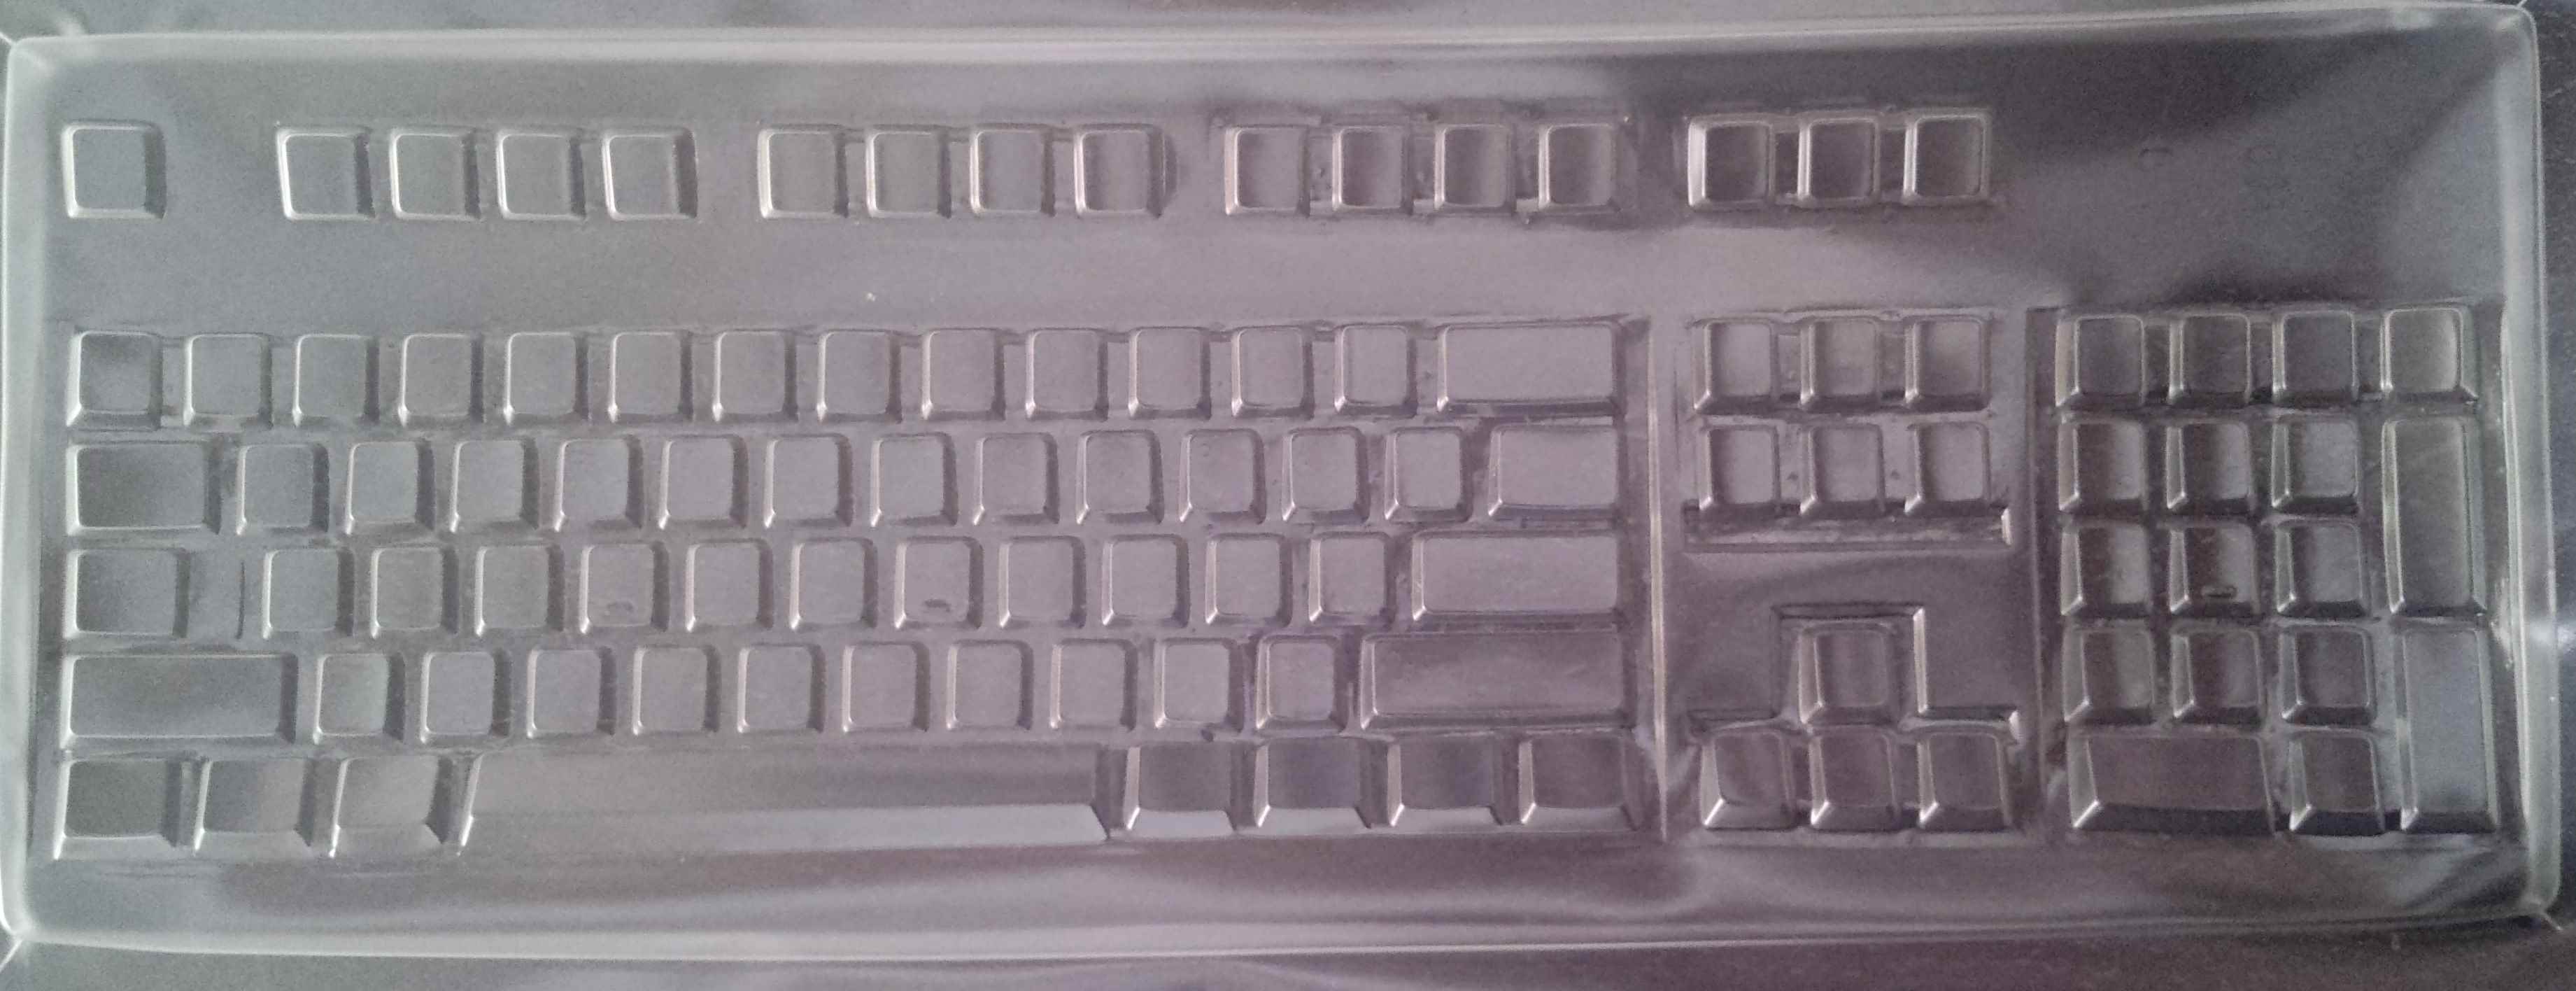 Cherry G83-6104 LPMUS & 01 Win & RS6000M Keyboard Cover